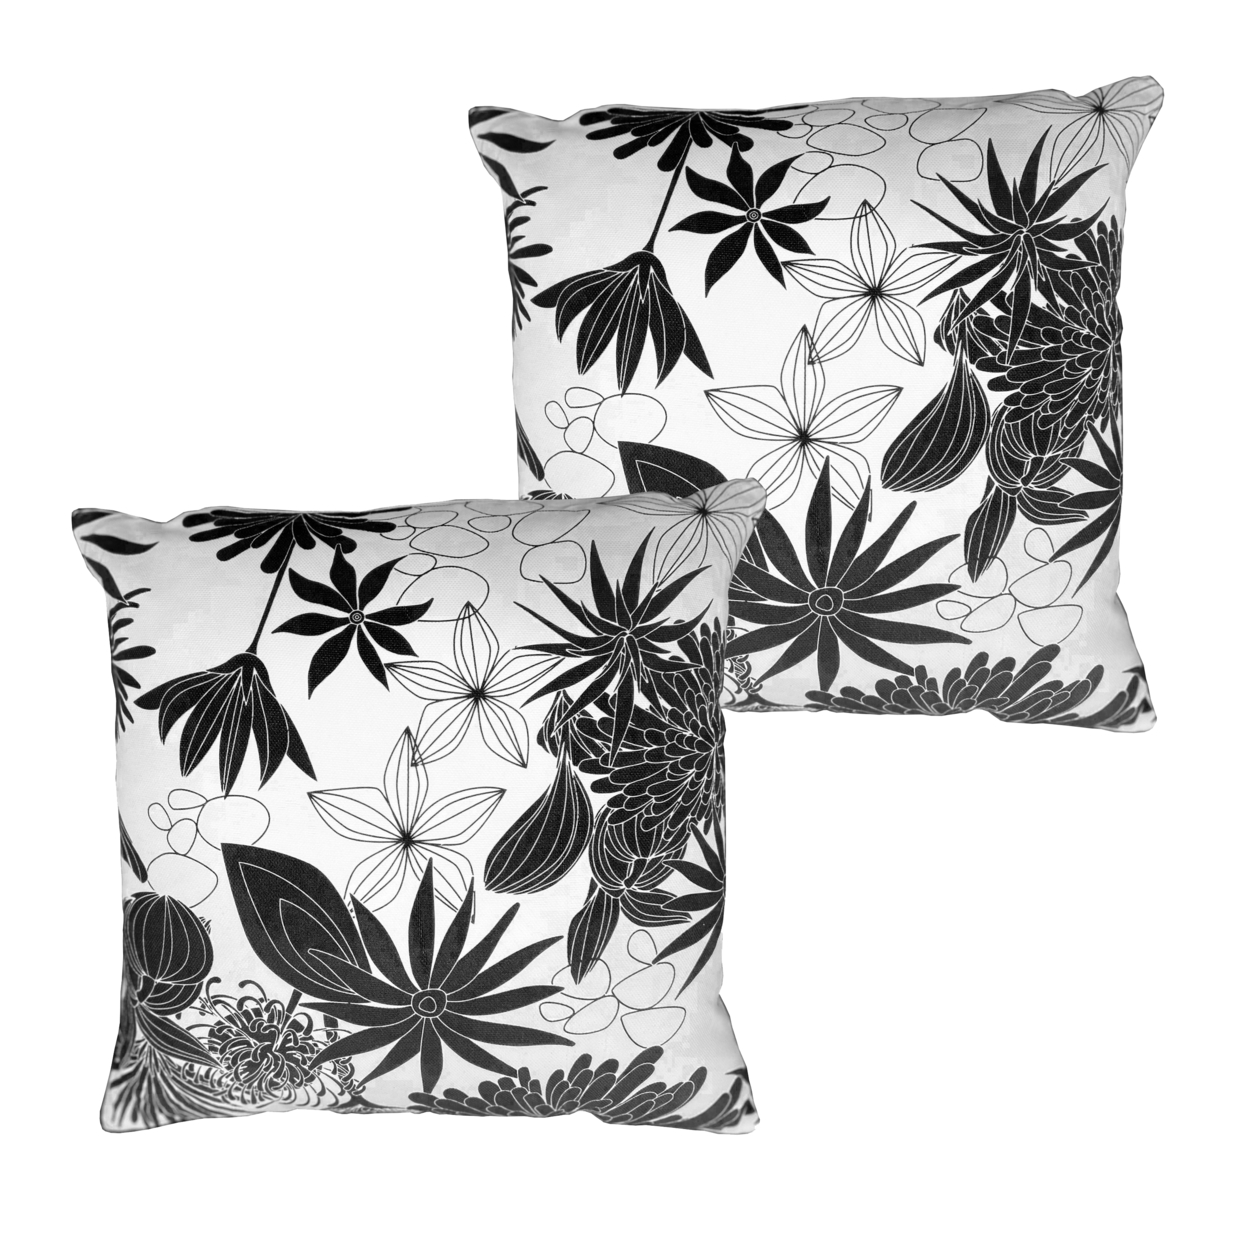 17 X 17 Inch Decorative Square Cotton Accent Throw Pillows, Classic Floral Print, Set Of 2, Black And White